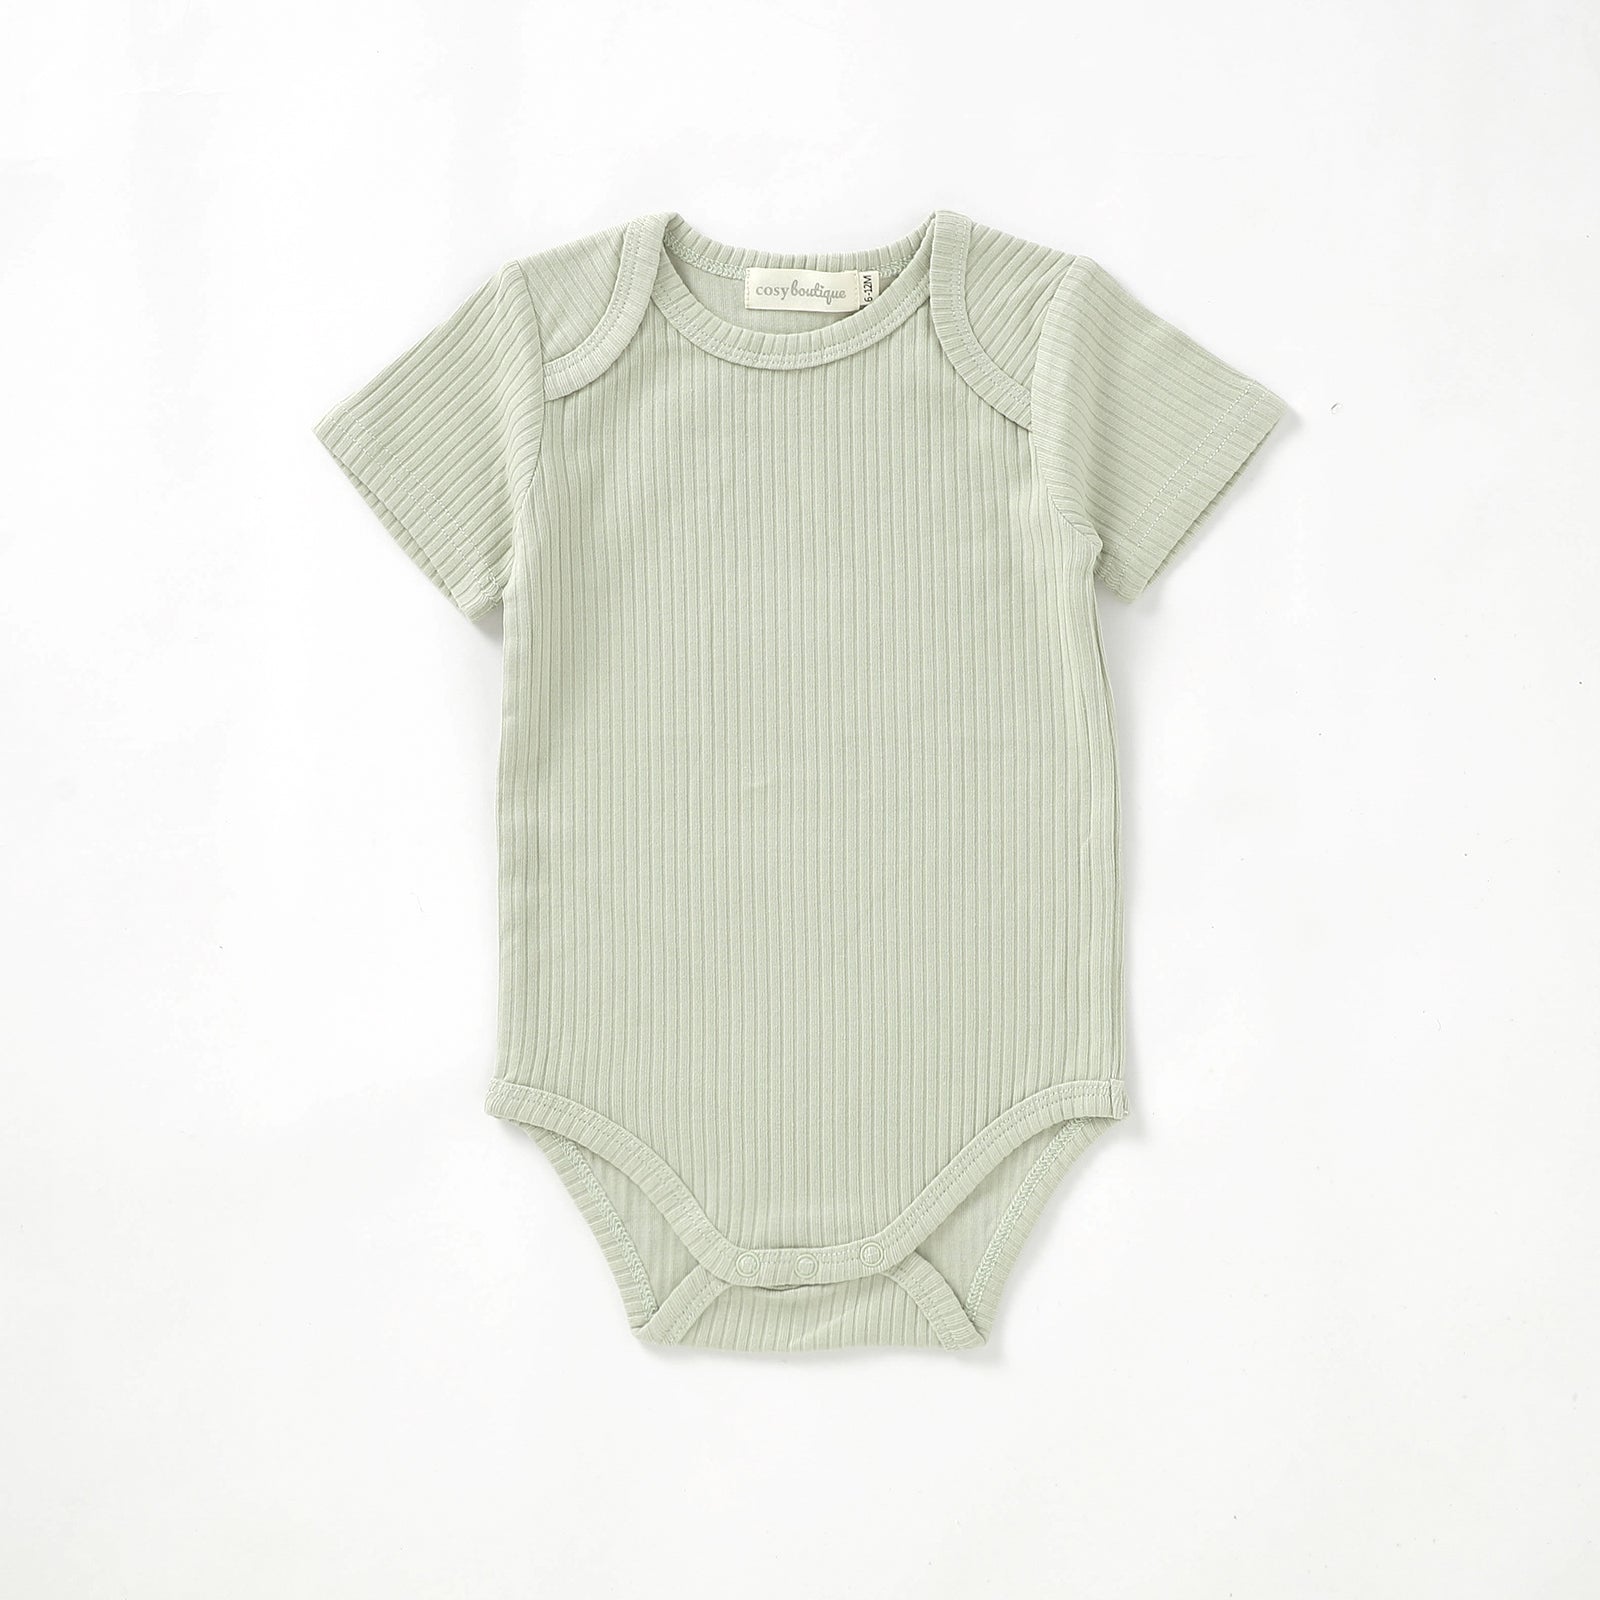 Organic Cotton Rib Short Sleeve Bodysuit 0-3 Months (000) / Pear | Baby Bodysuits | Boys & Girls Clothing | Babies, Toddlers & Kids | Cosy Boutique NZ